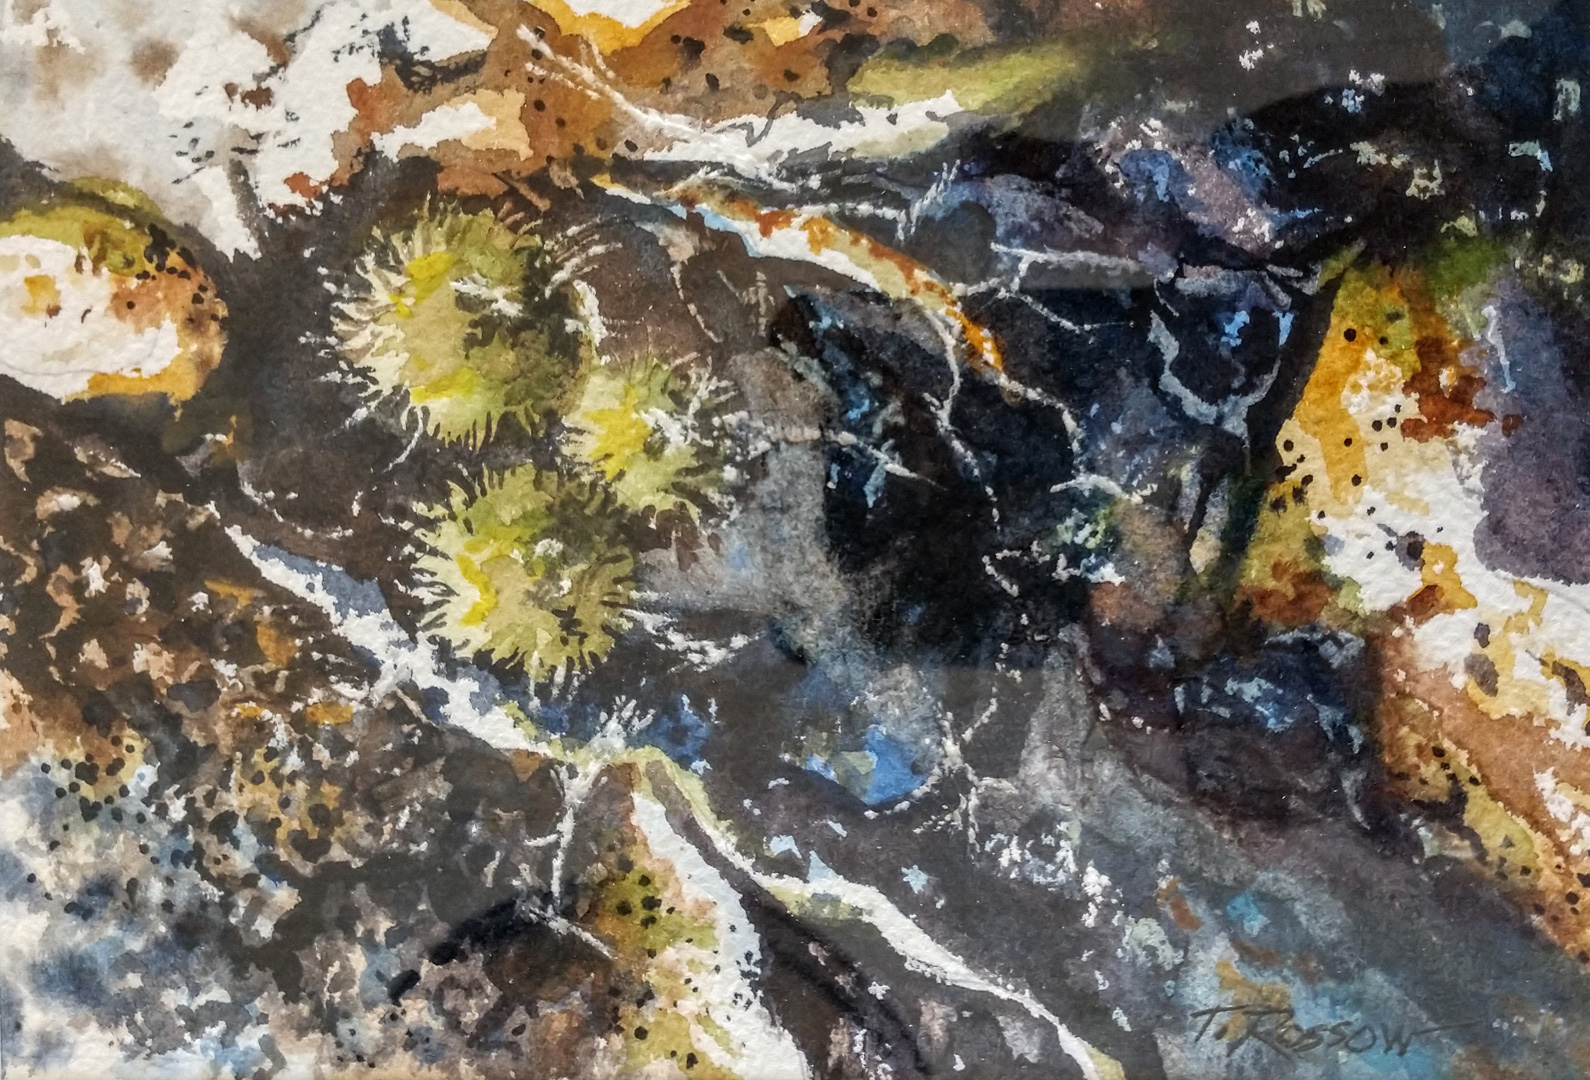 Tide Pool with Anemones, Watercolor on paper, 6.5 x 4.5